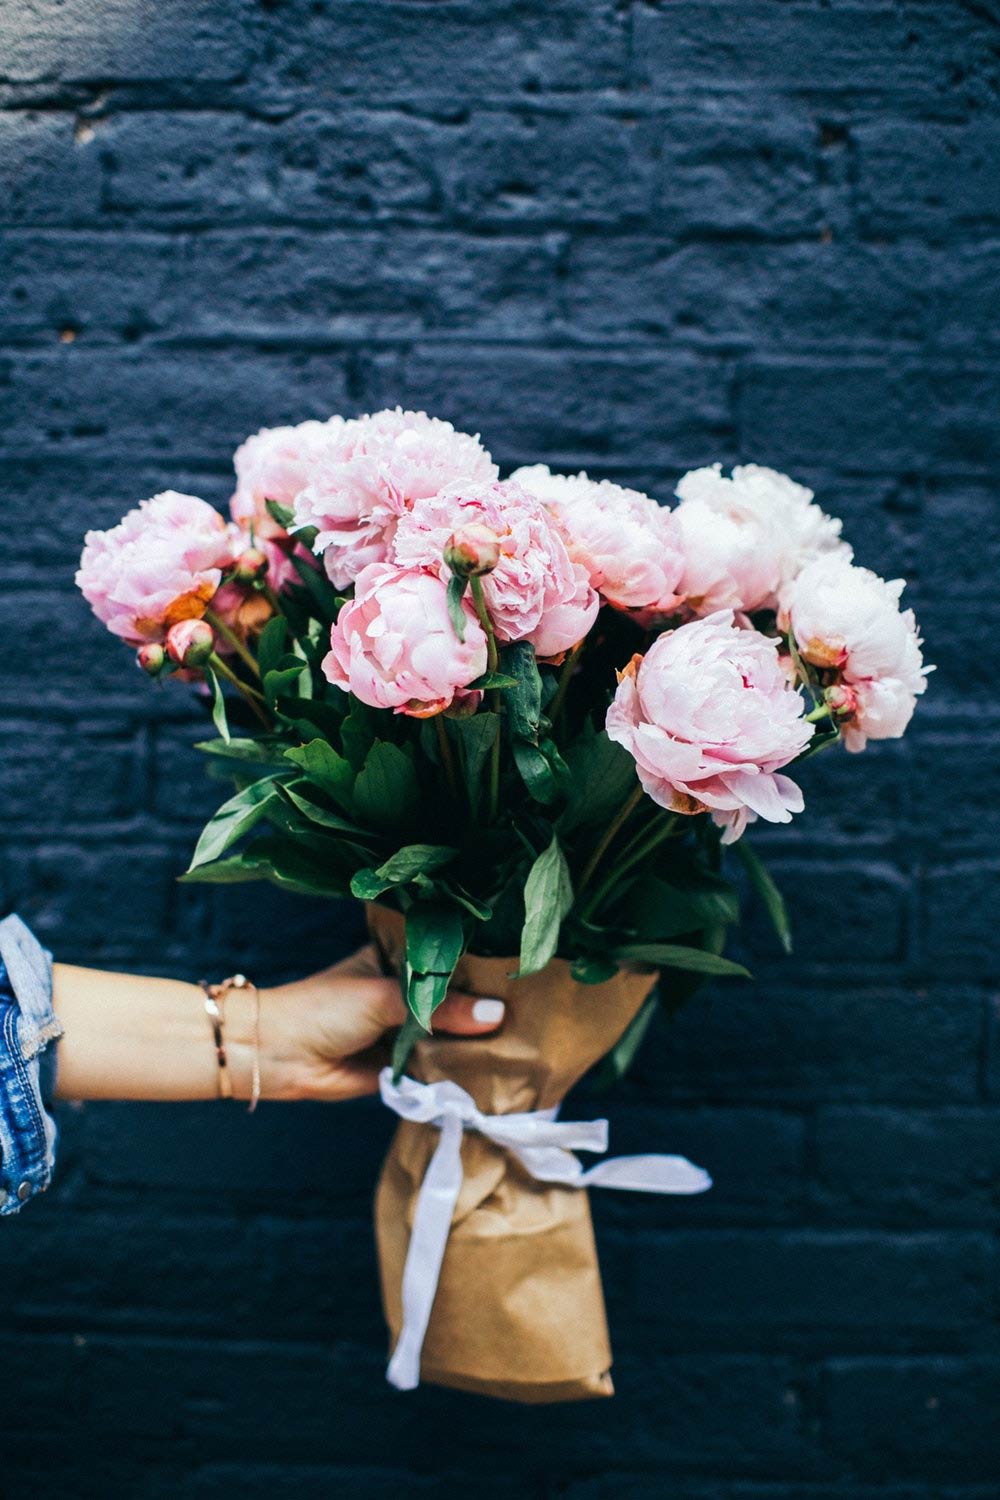 Choosing Your Flowers to Give on Valentine’s Day